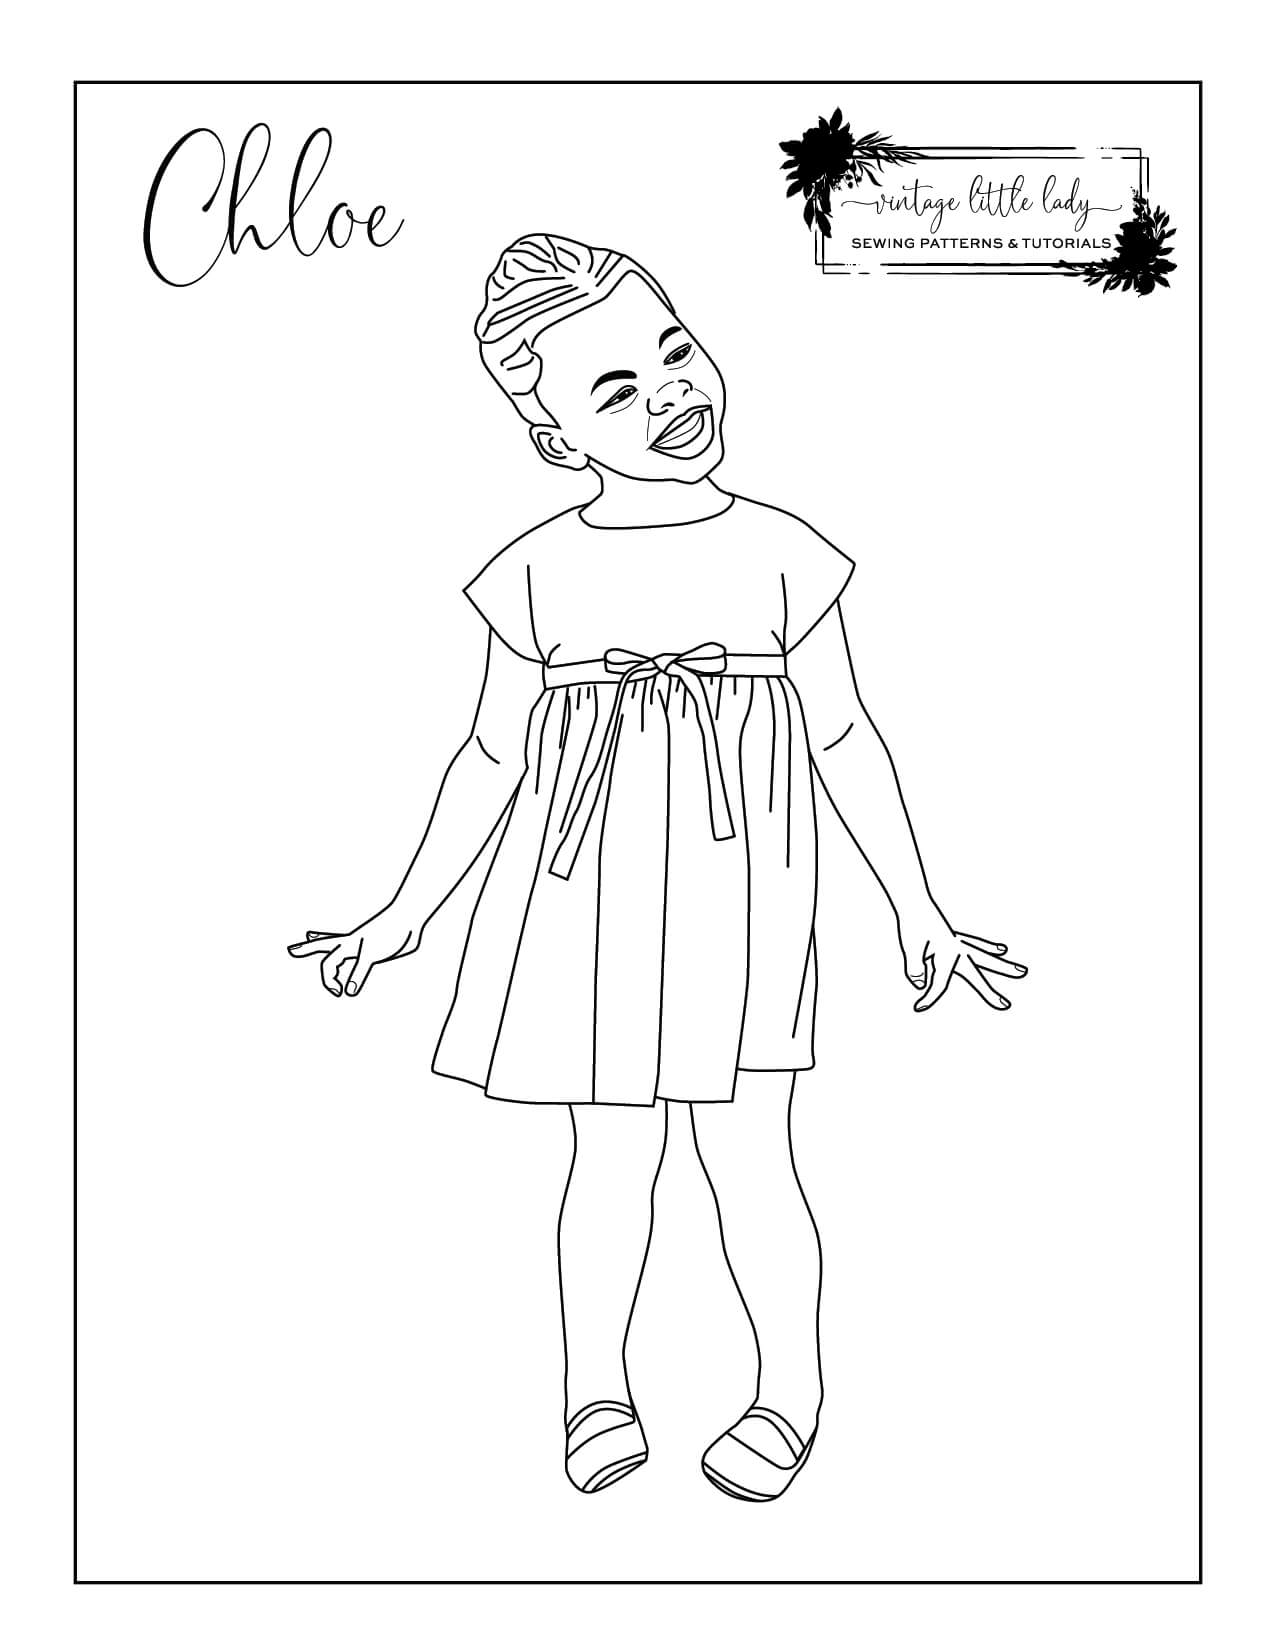 Chloe Coloring Page